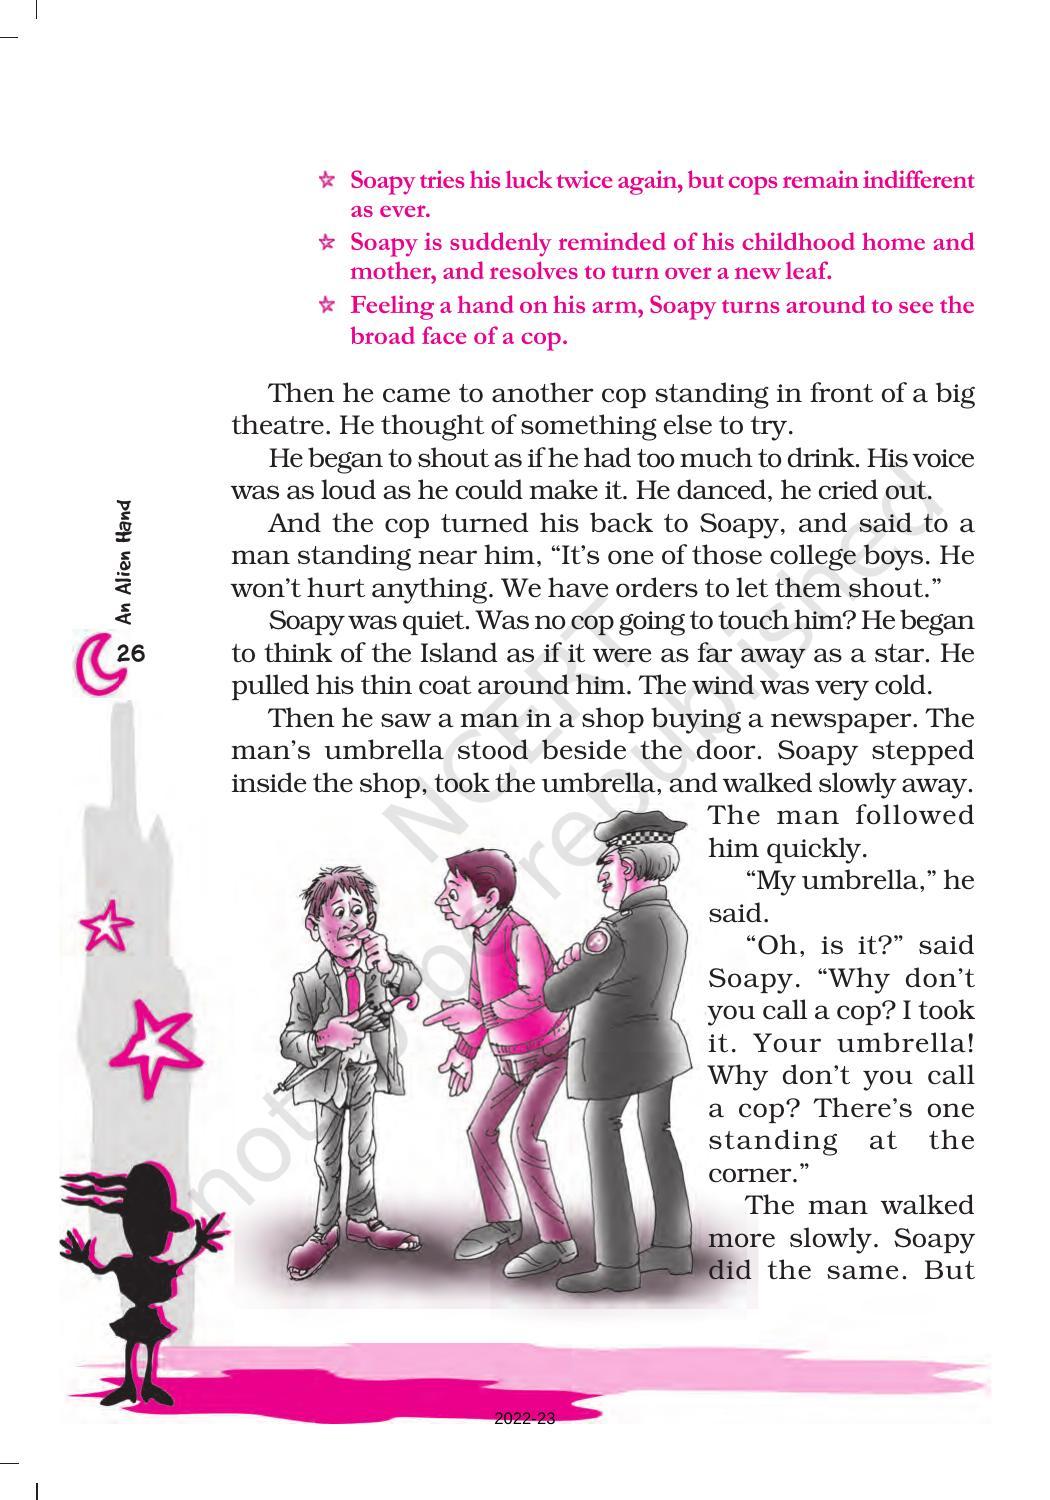 NCERT Book for Class 7 English (An Alien Hand): Chapter 4-The Cop and the Anthem - Page 7